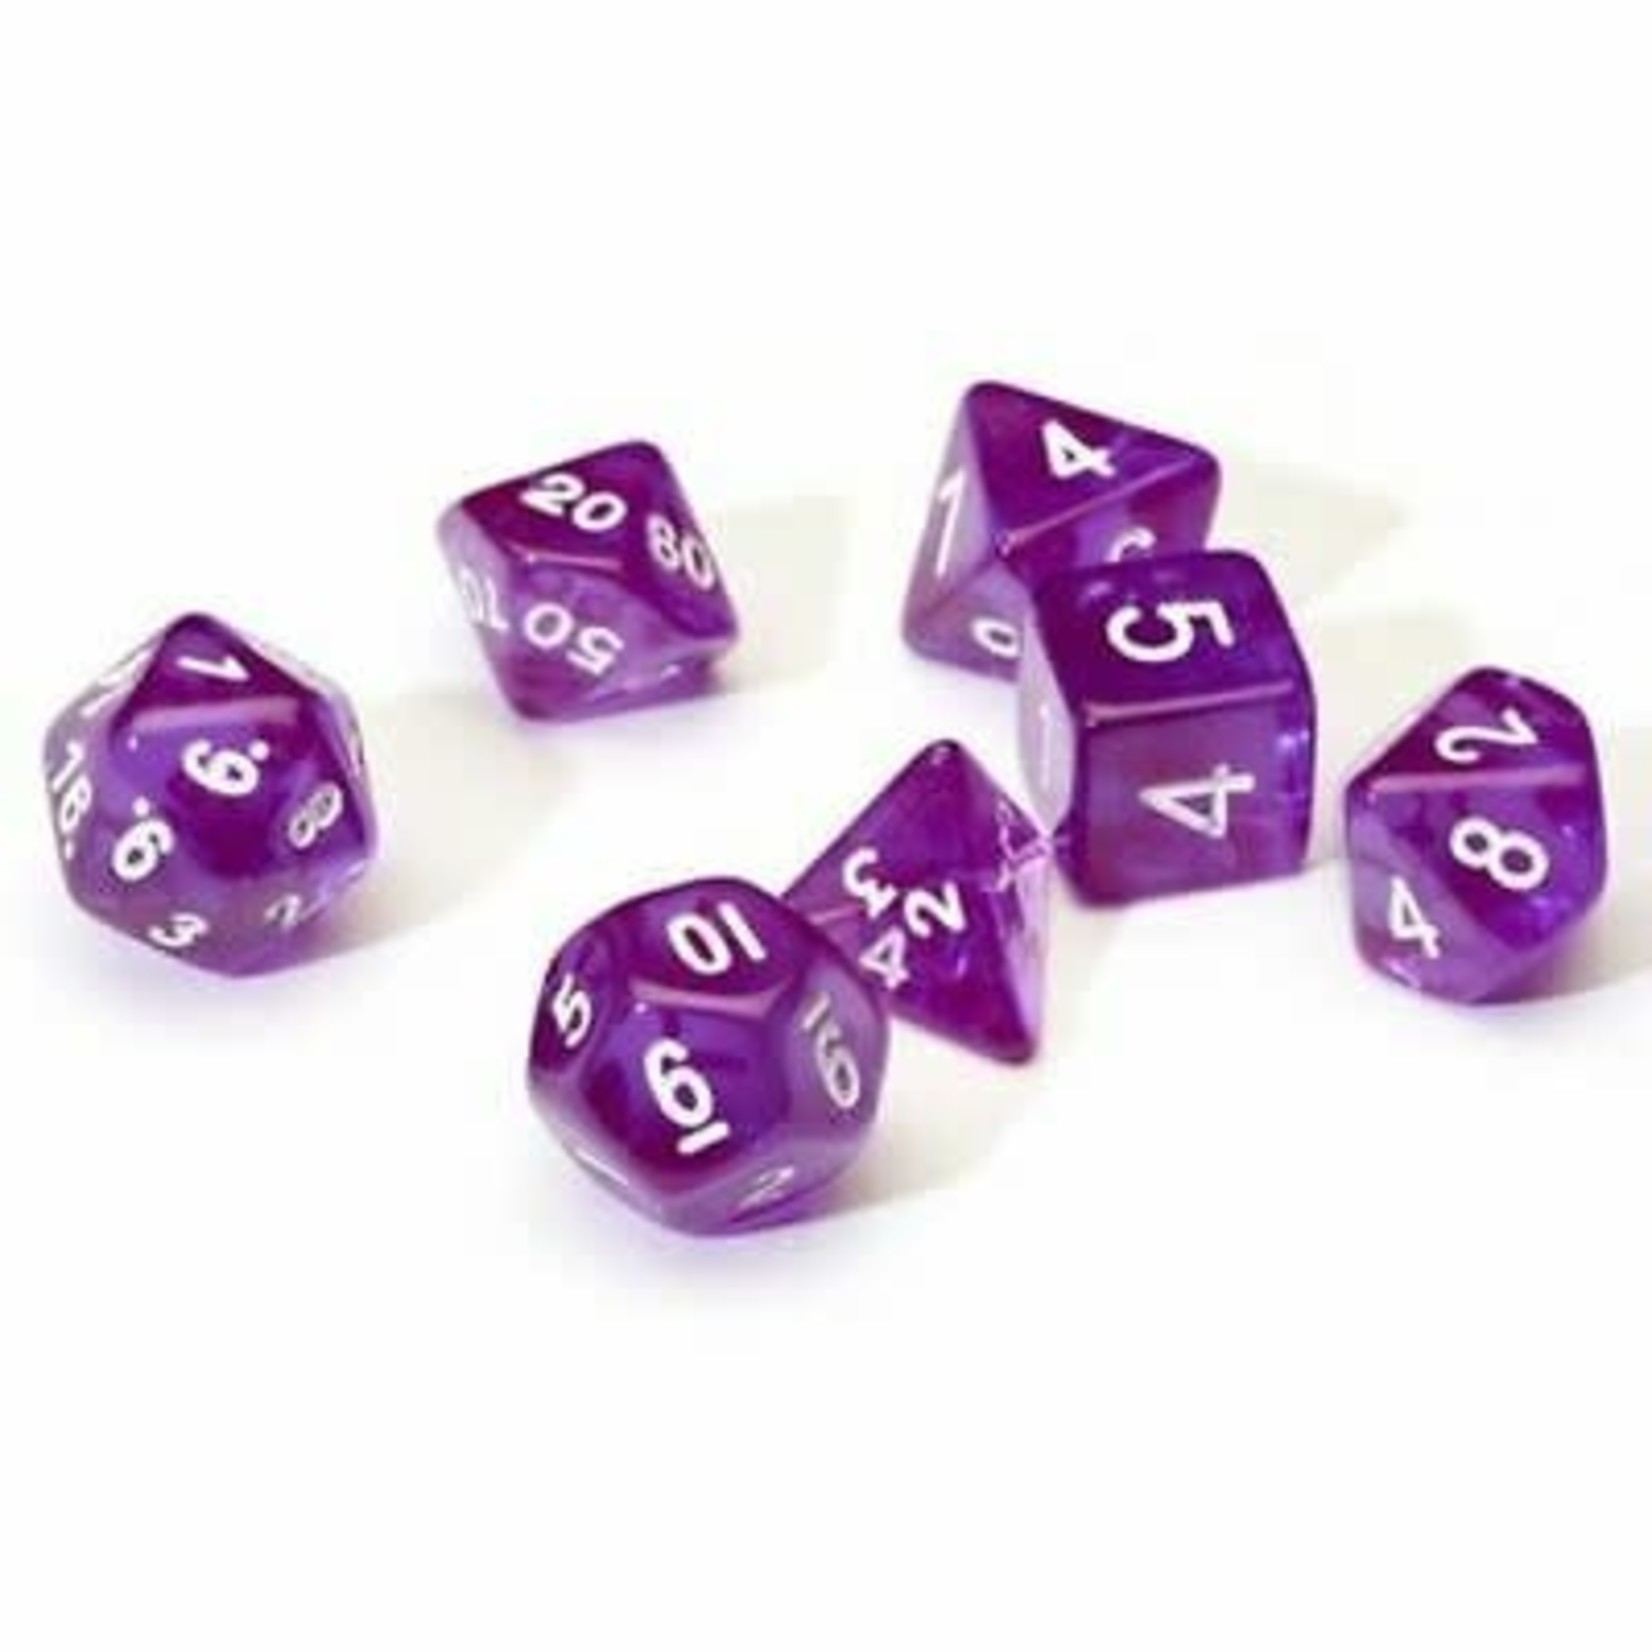 Sirius RPG Dice Translucent Purple with White Polyhedral 8 die set